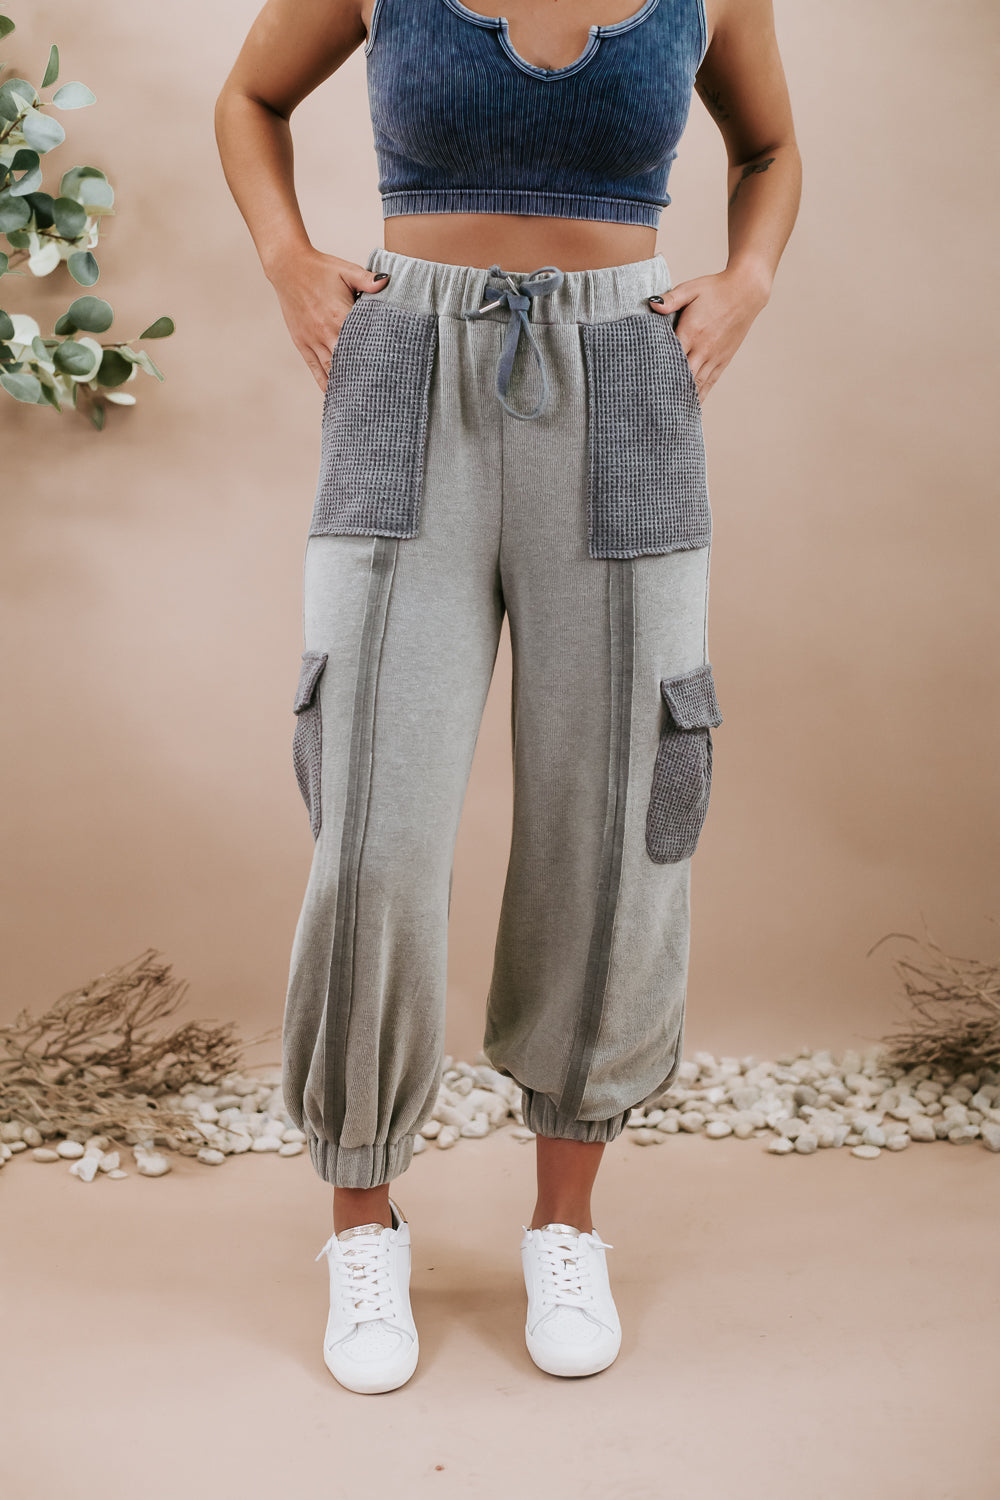 Popwings Casual Grey Solid Twill Joggers For Women | Relaxed Fit Joggers |  Daily Wear Joggers Women | Joggers for Gym Wear | Western Wear Joggers